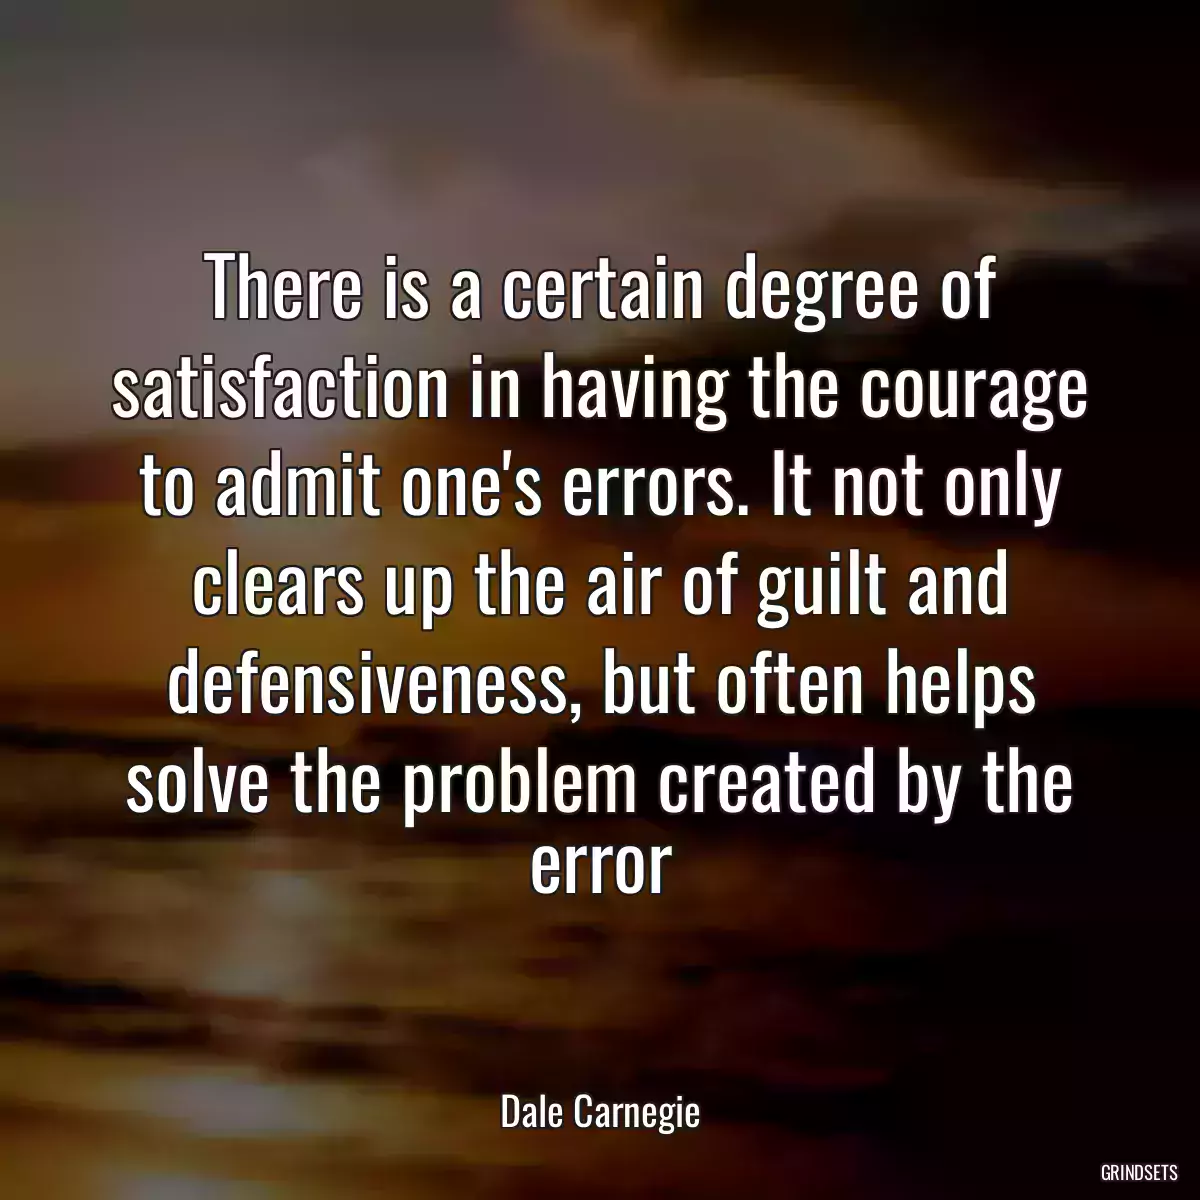 There is a certain degree of satisfaction in having the courage to admit one\'s errors. It not only clears up the air of guilt and defensiveness, but often helps solve the problem created by the error